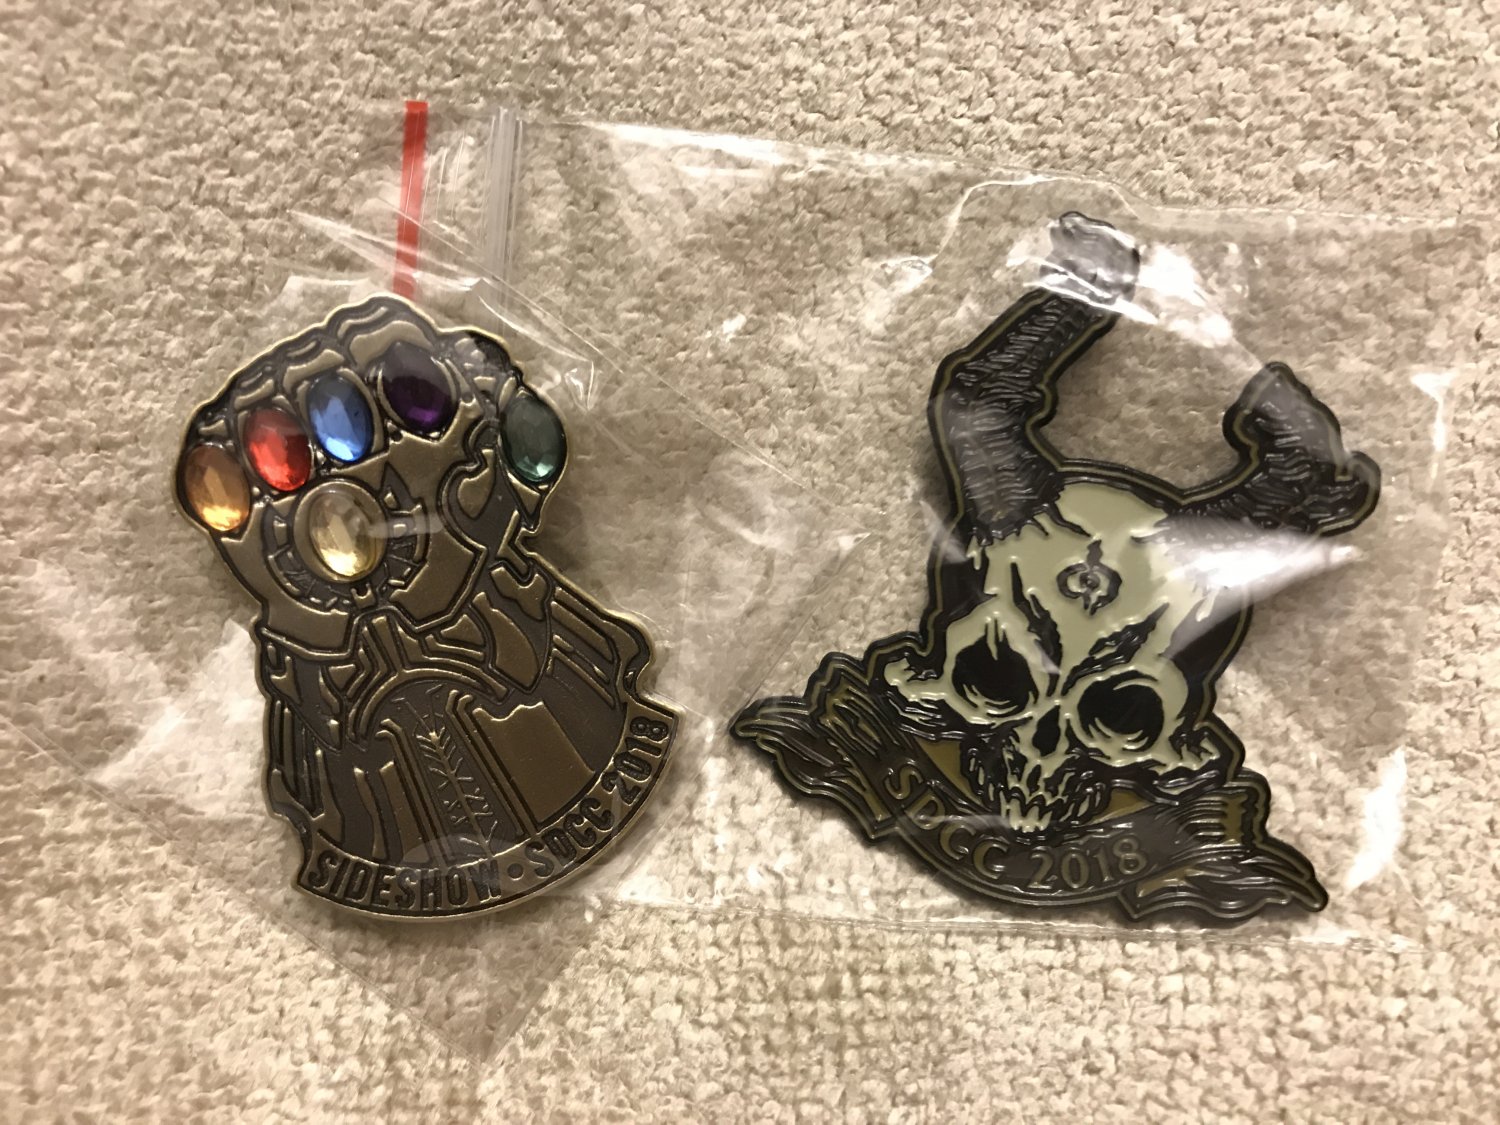 SDCC 2018 SideShow pins - Court of the Dead & Marvel